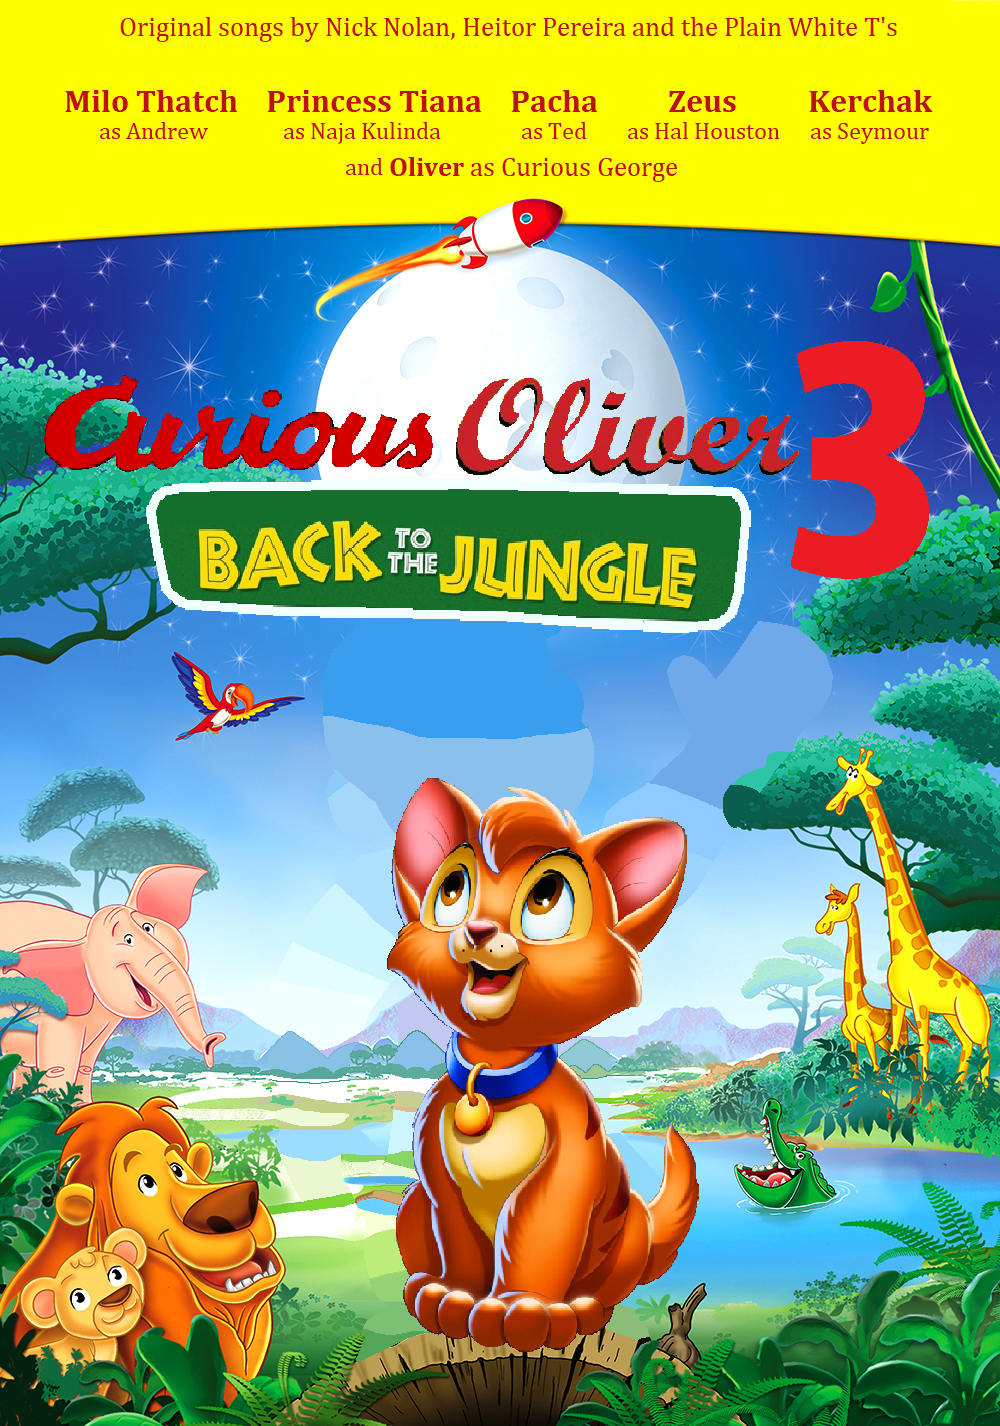 https://static.wikia.nocookie.net/parody/images/f/f0/Curious_Oliver_3_Back_to_the_Jungle_%28Parody%29_Poster.png/revision/latest?cb=20200527111507